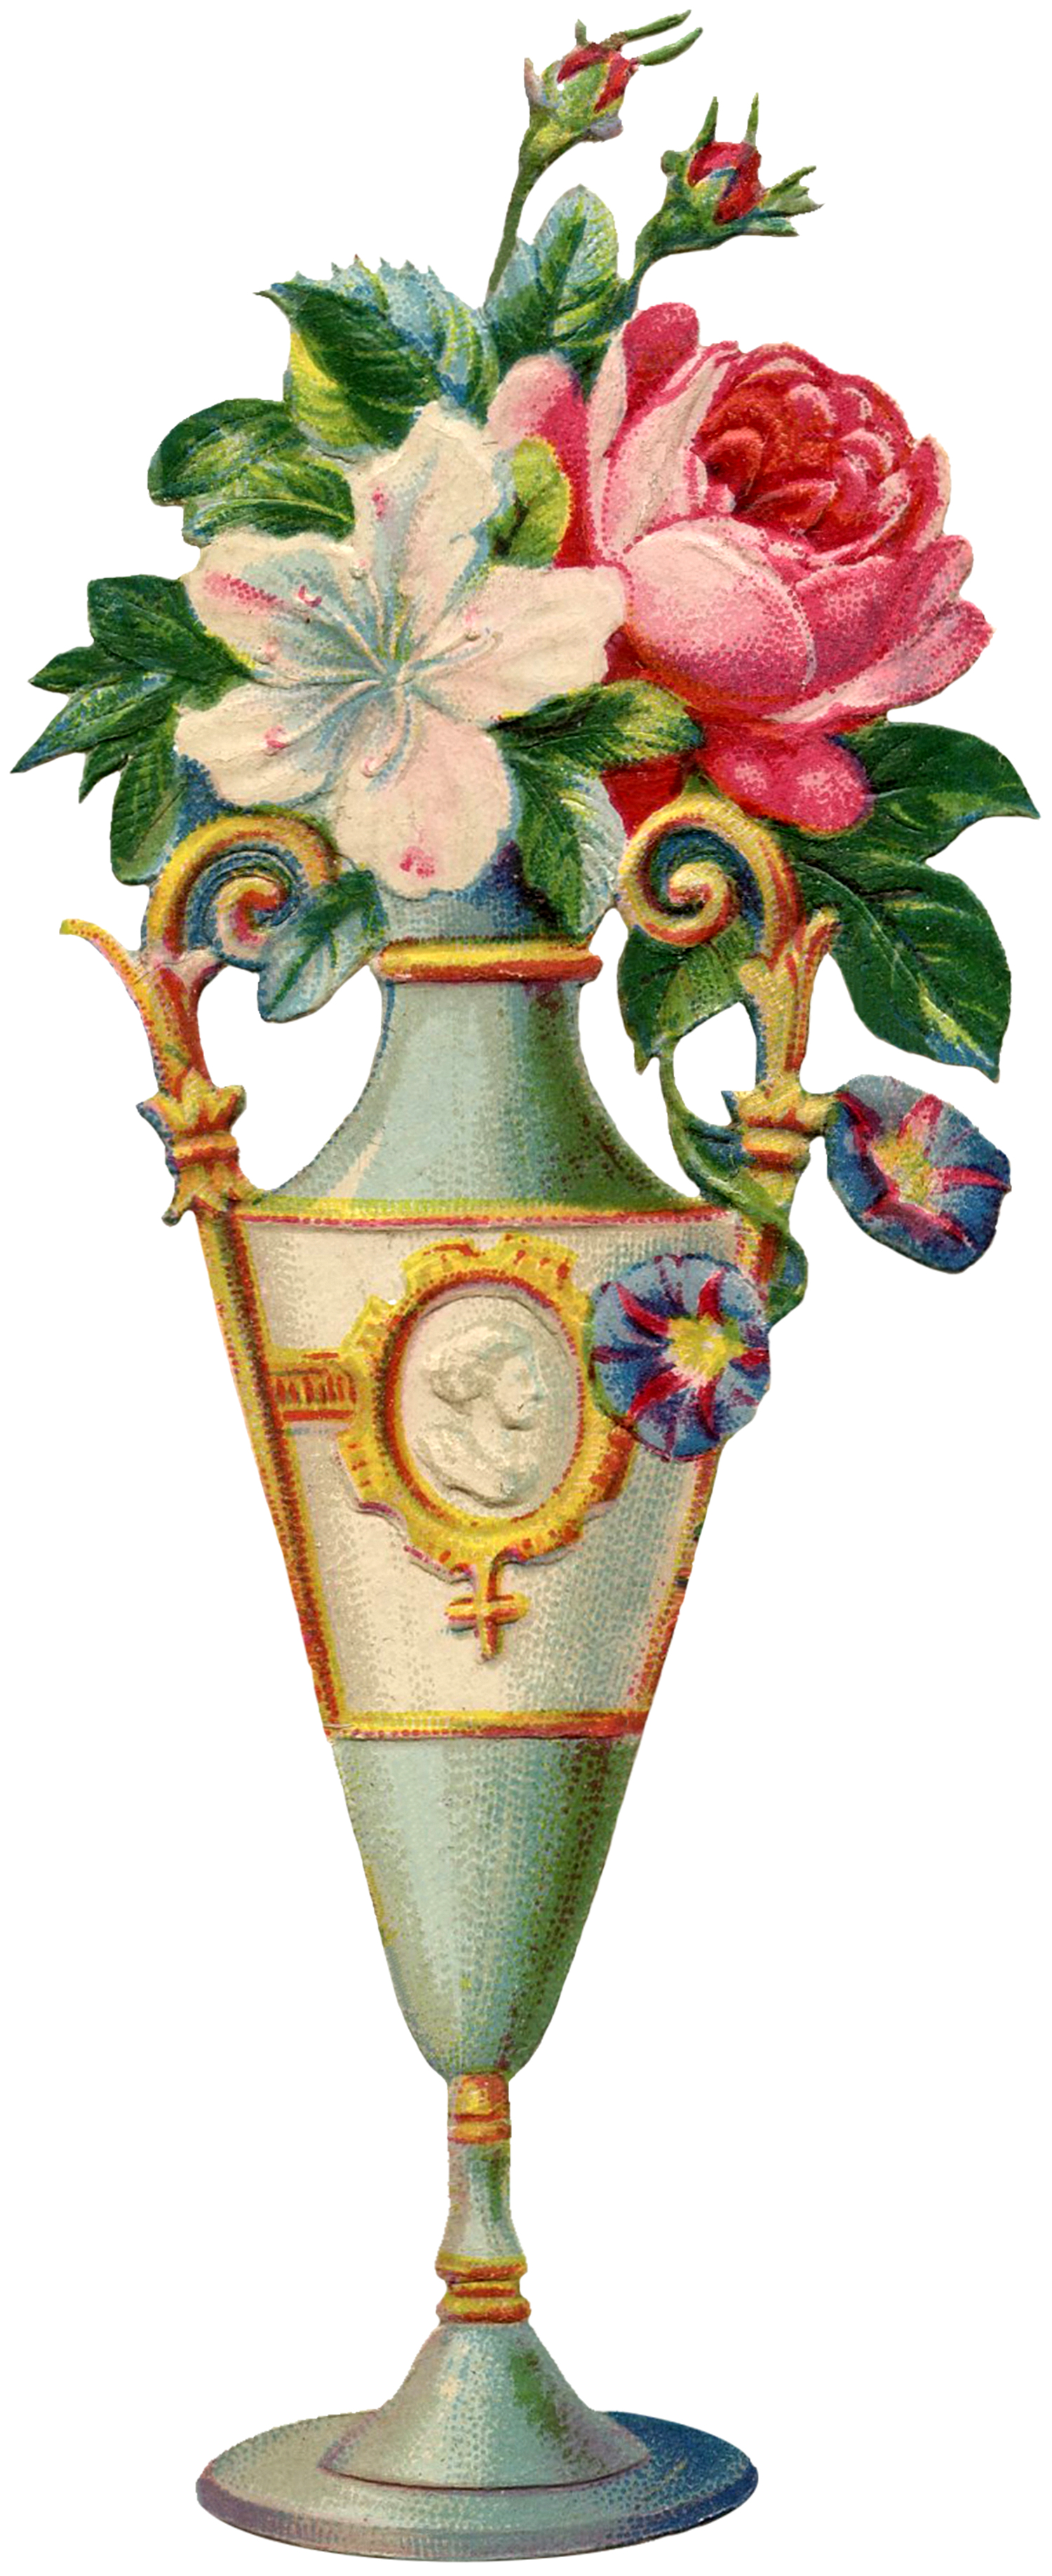 Floral Vase Image - The Graphics Fairy